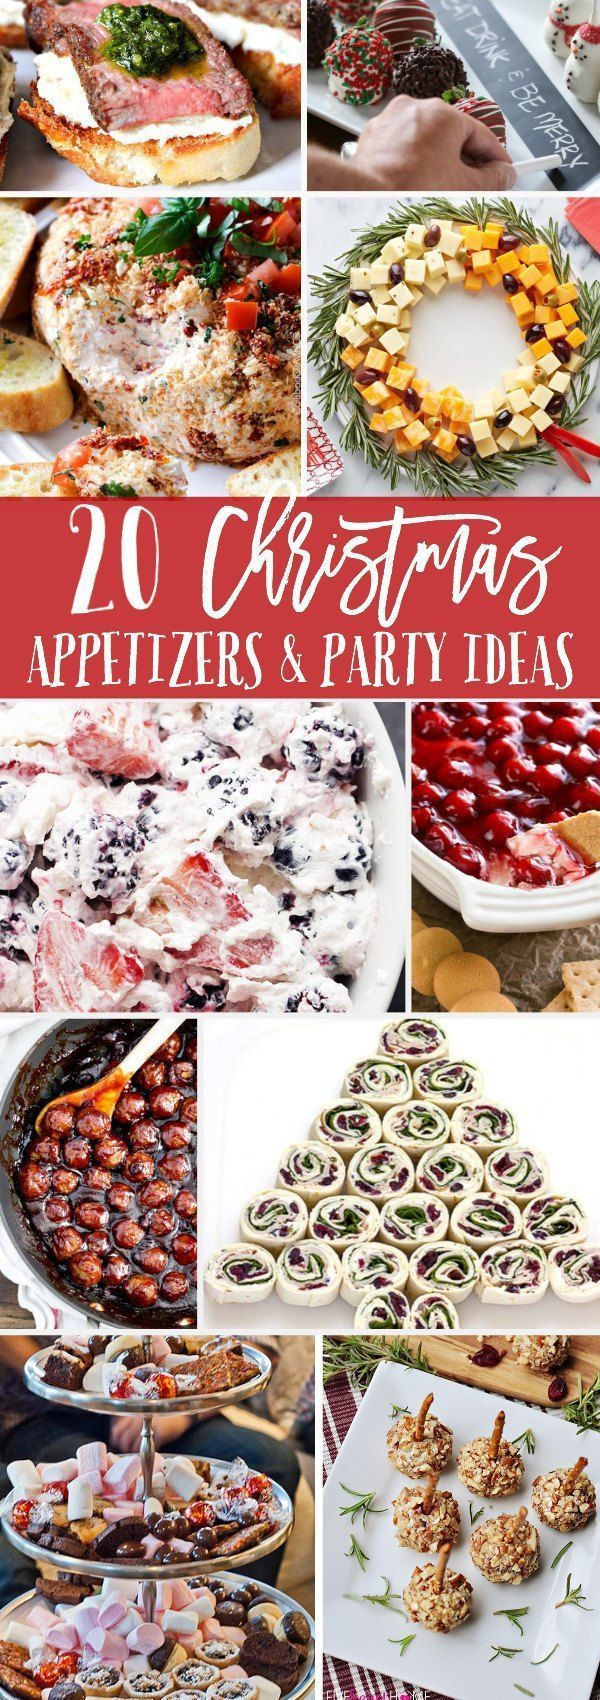 Great Appetizers For Christmas Party
 Top 25 best Christmas party appetizers ideas on Pinterest